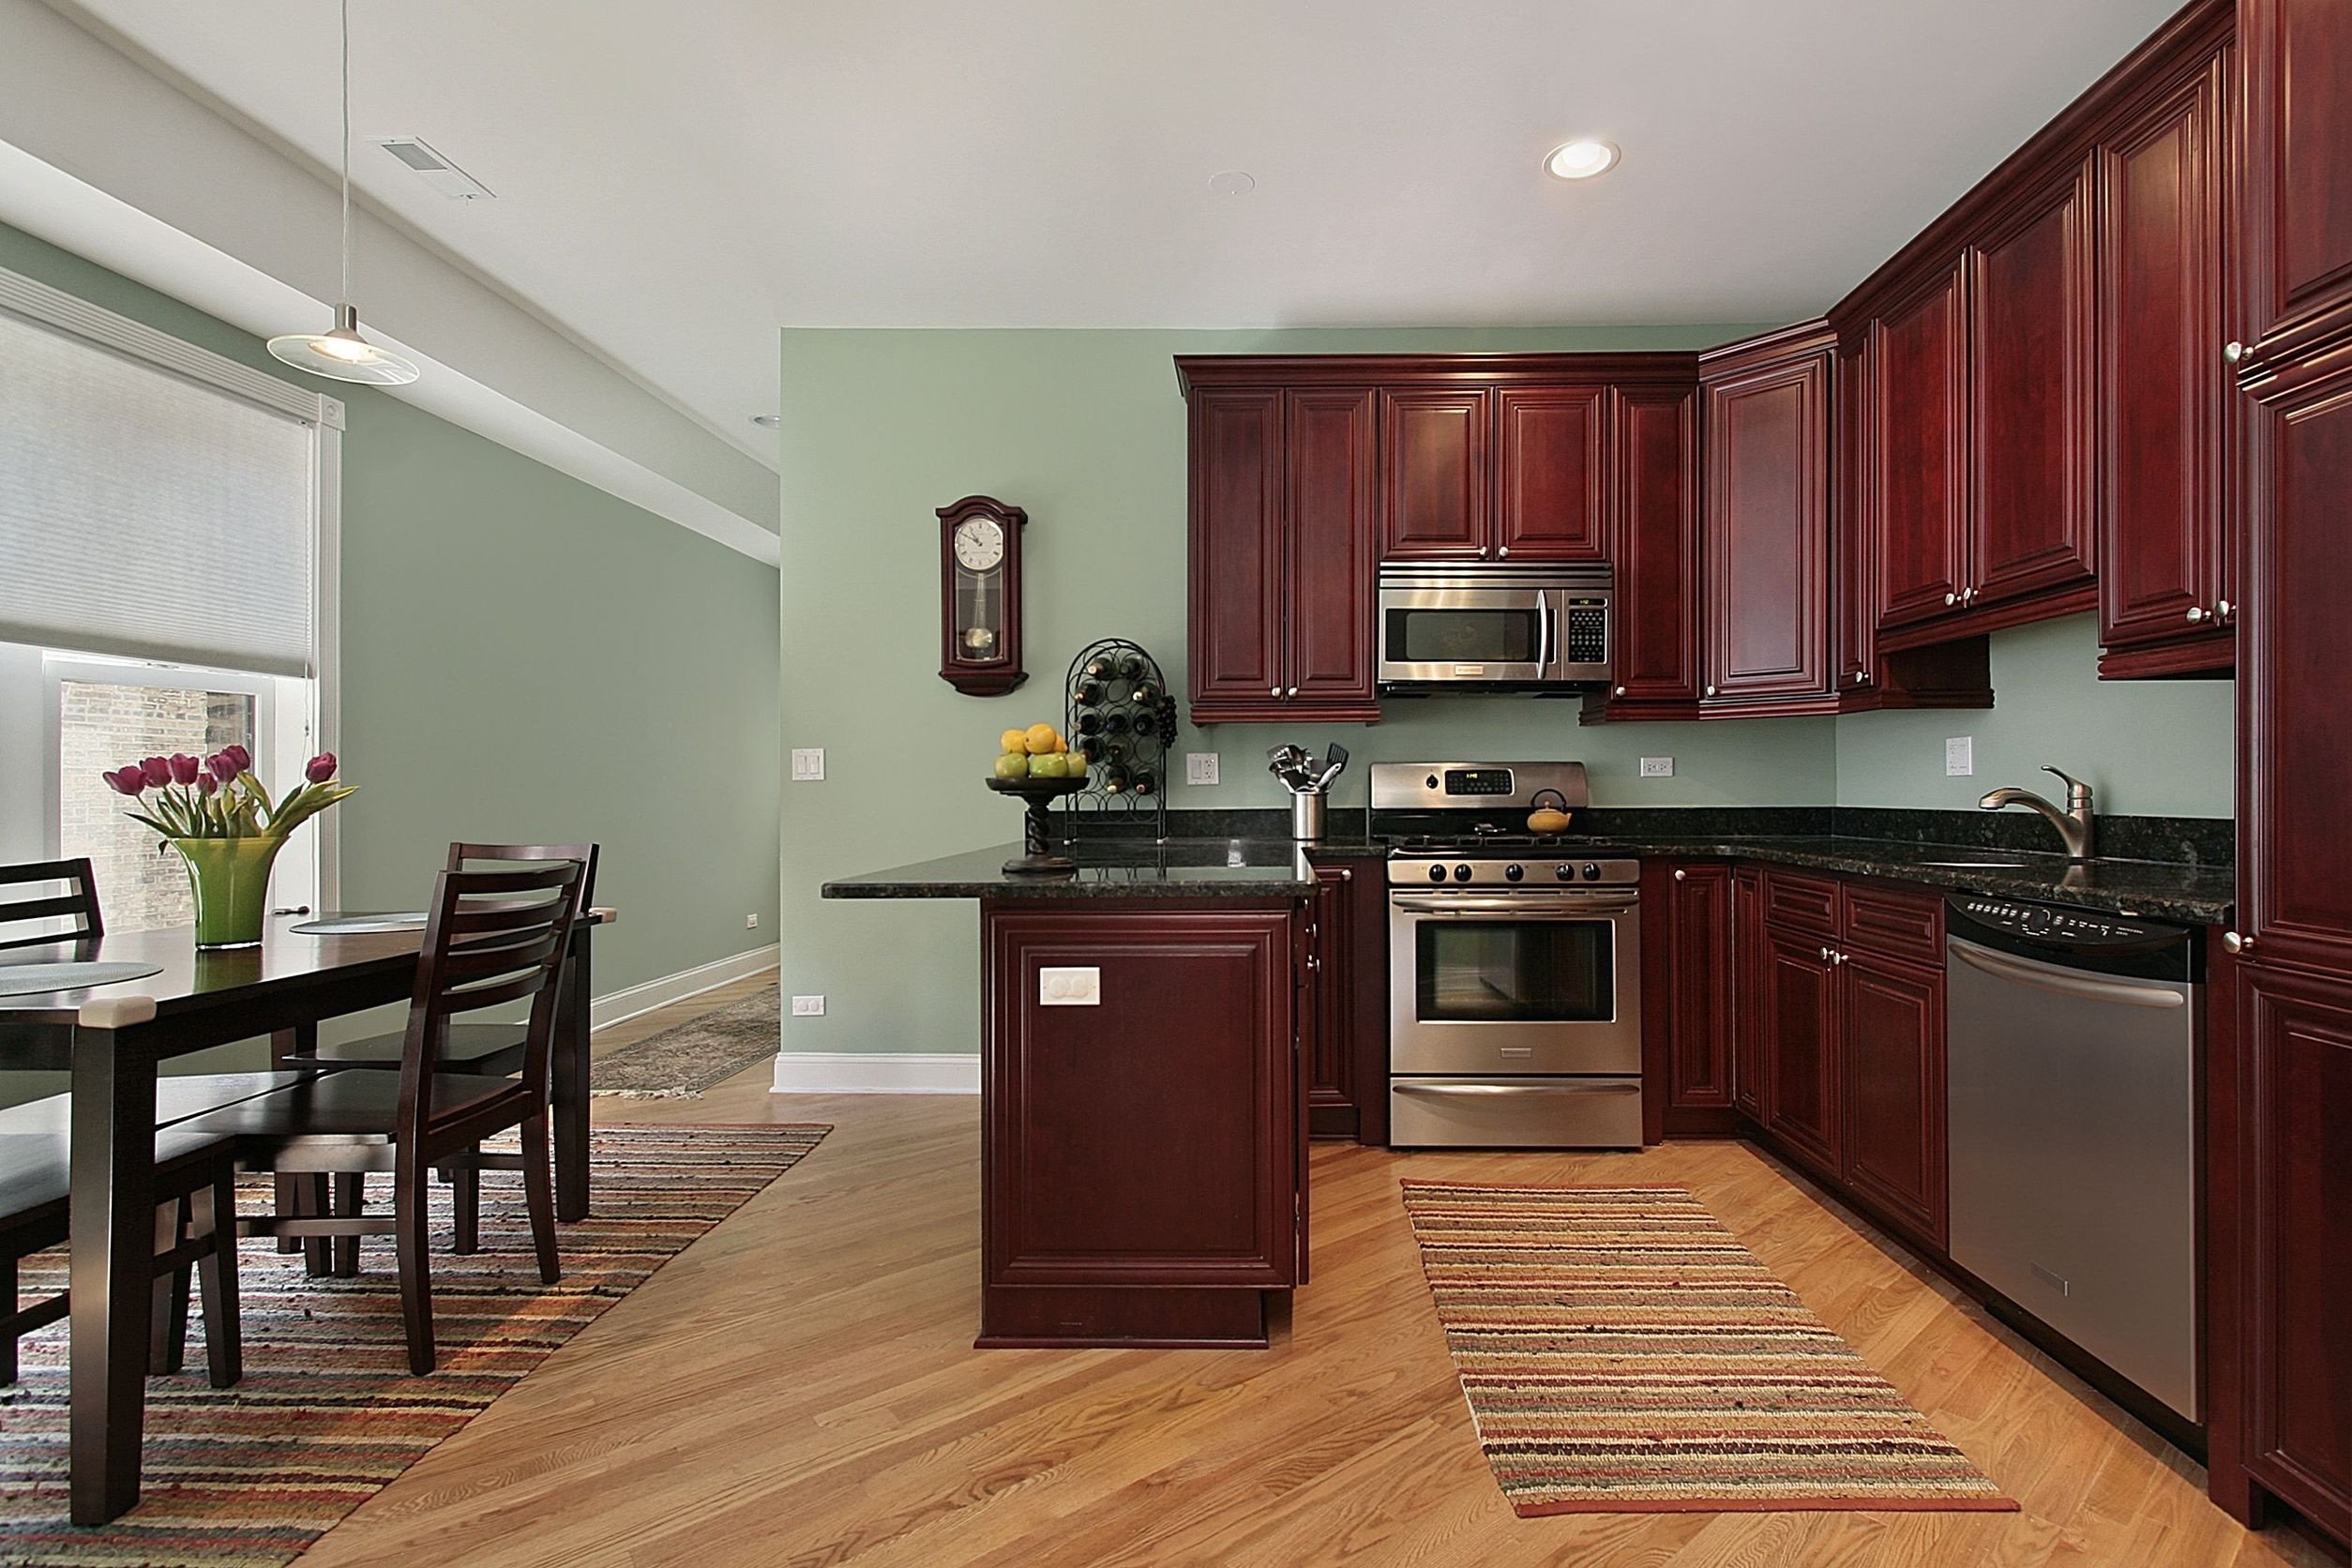 Amazing Kitchen Paint Colors With Maple Cabinets Aeaart Design 